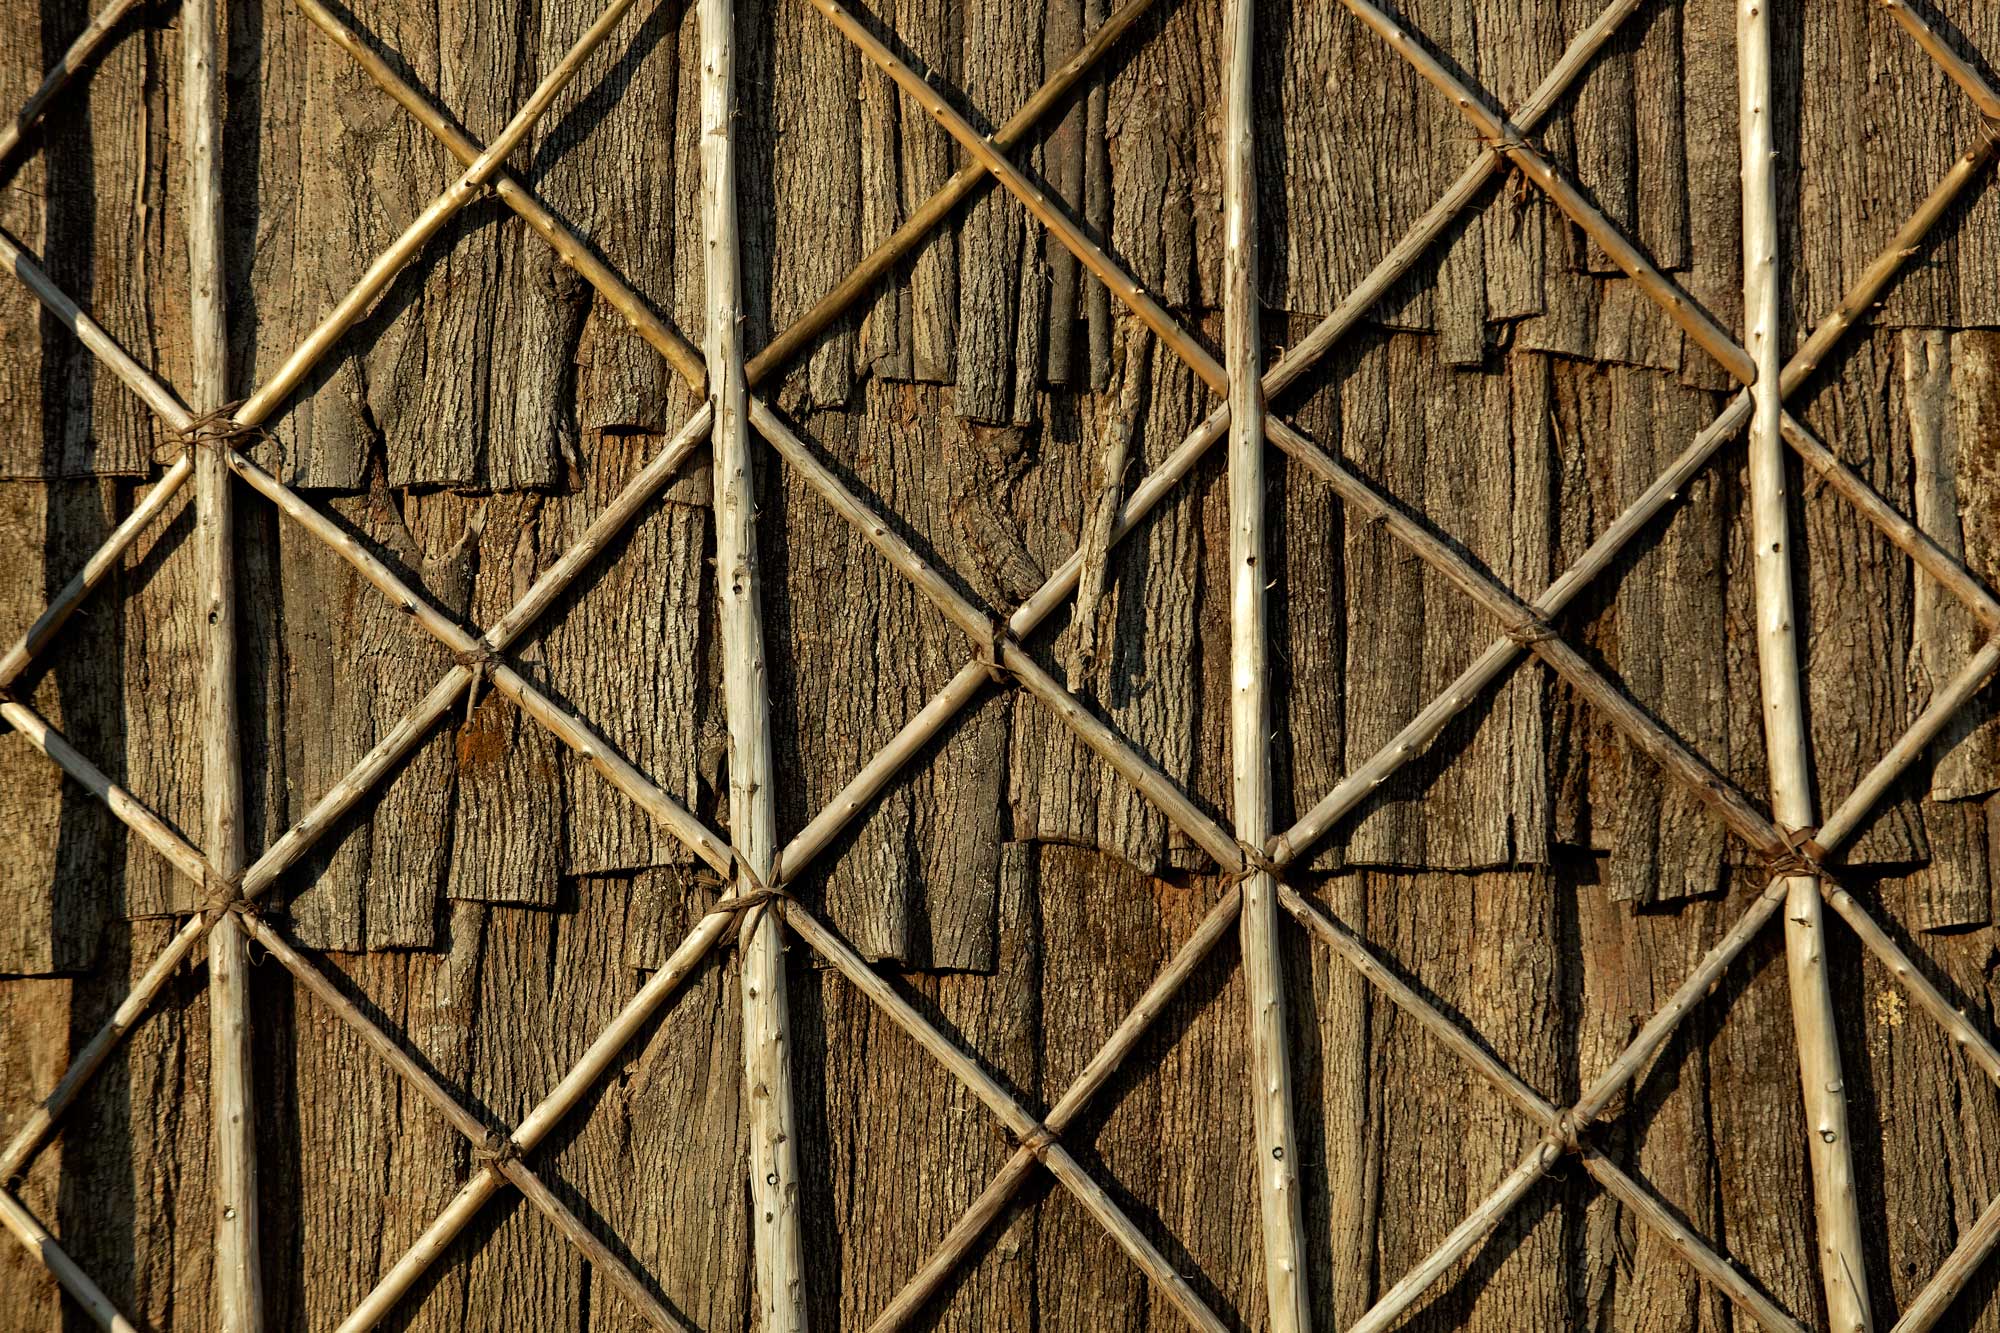 a close up of a wooden fence with metal bars.